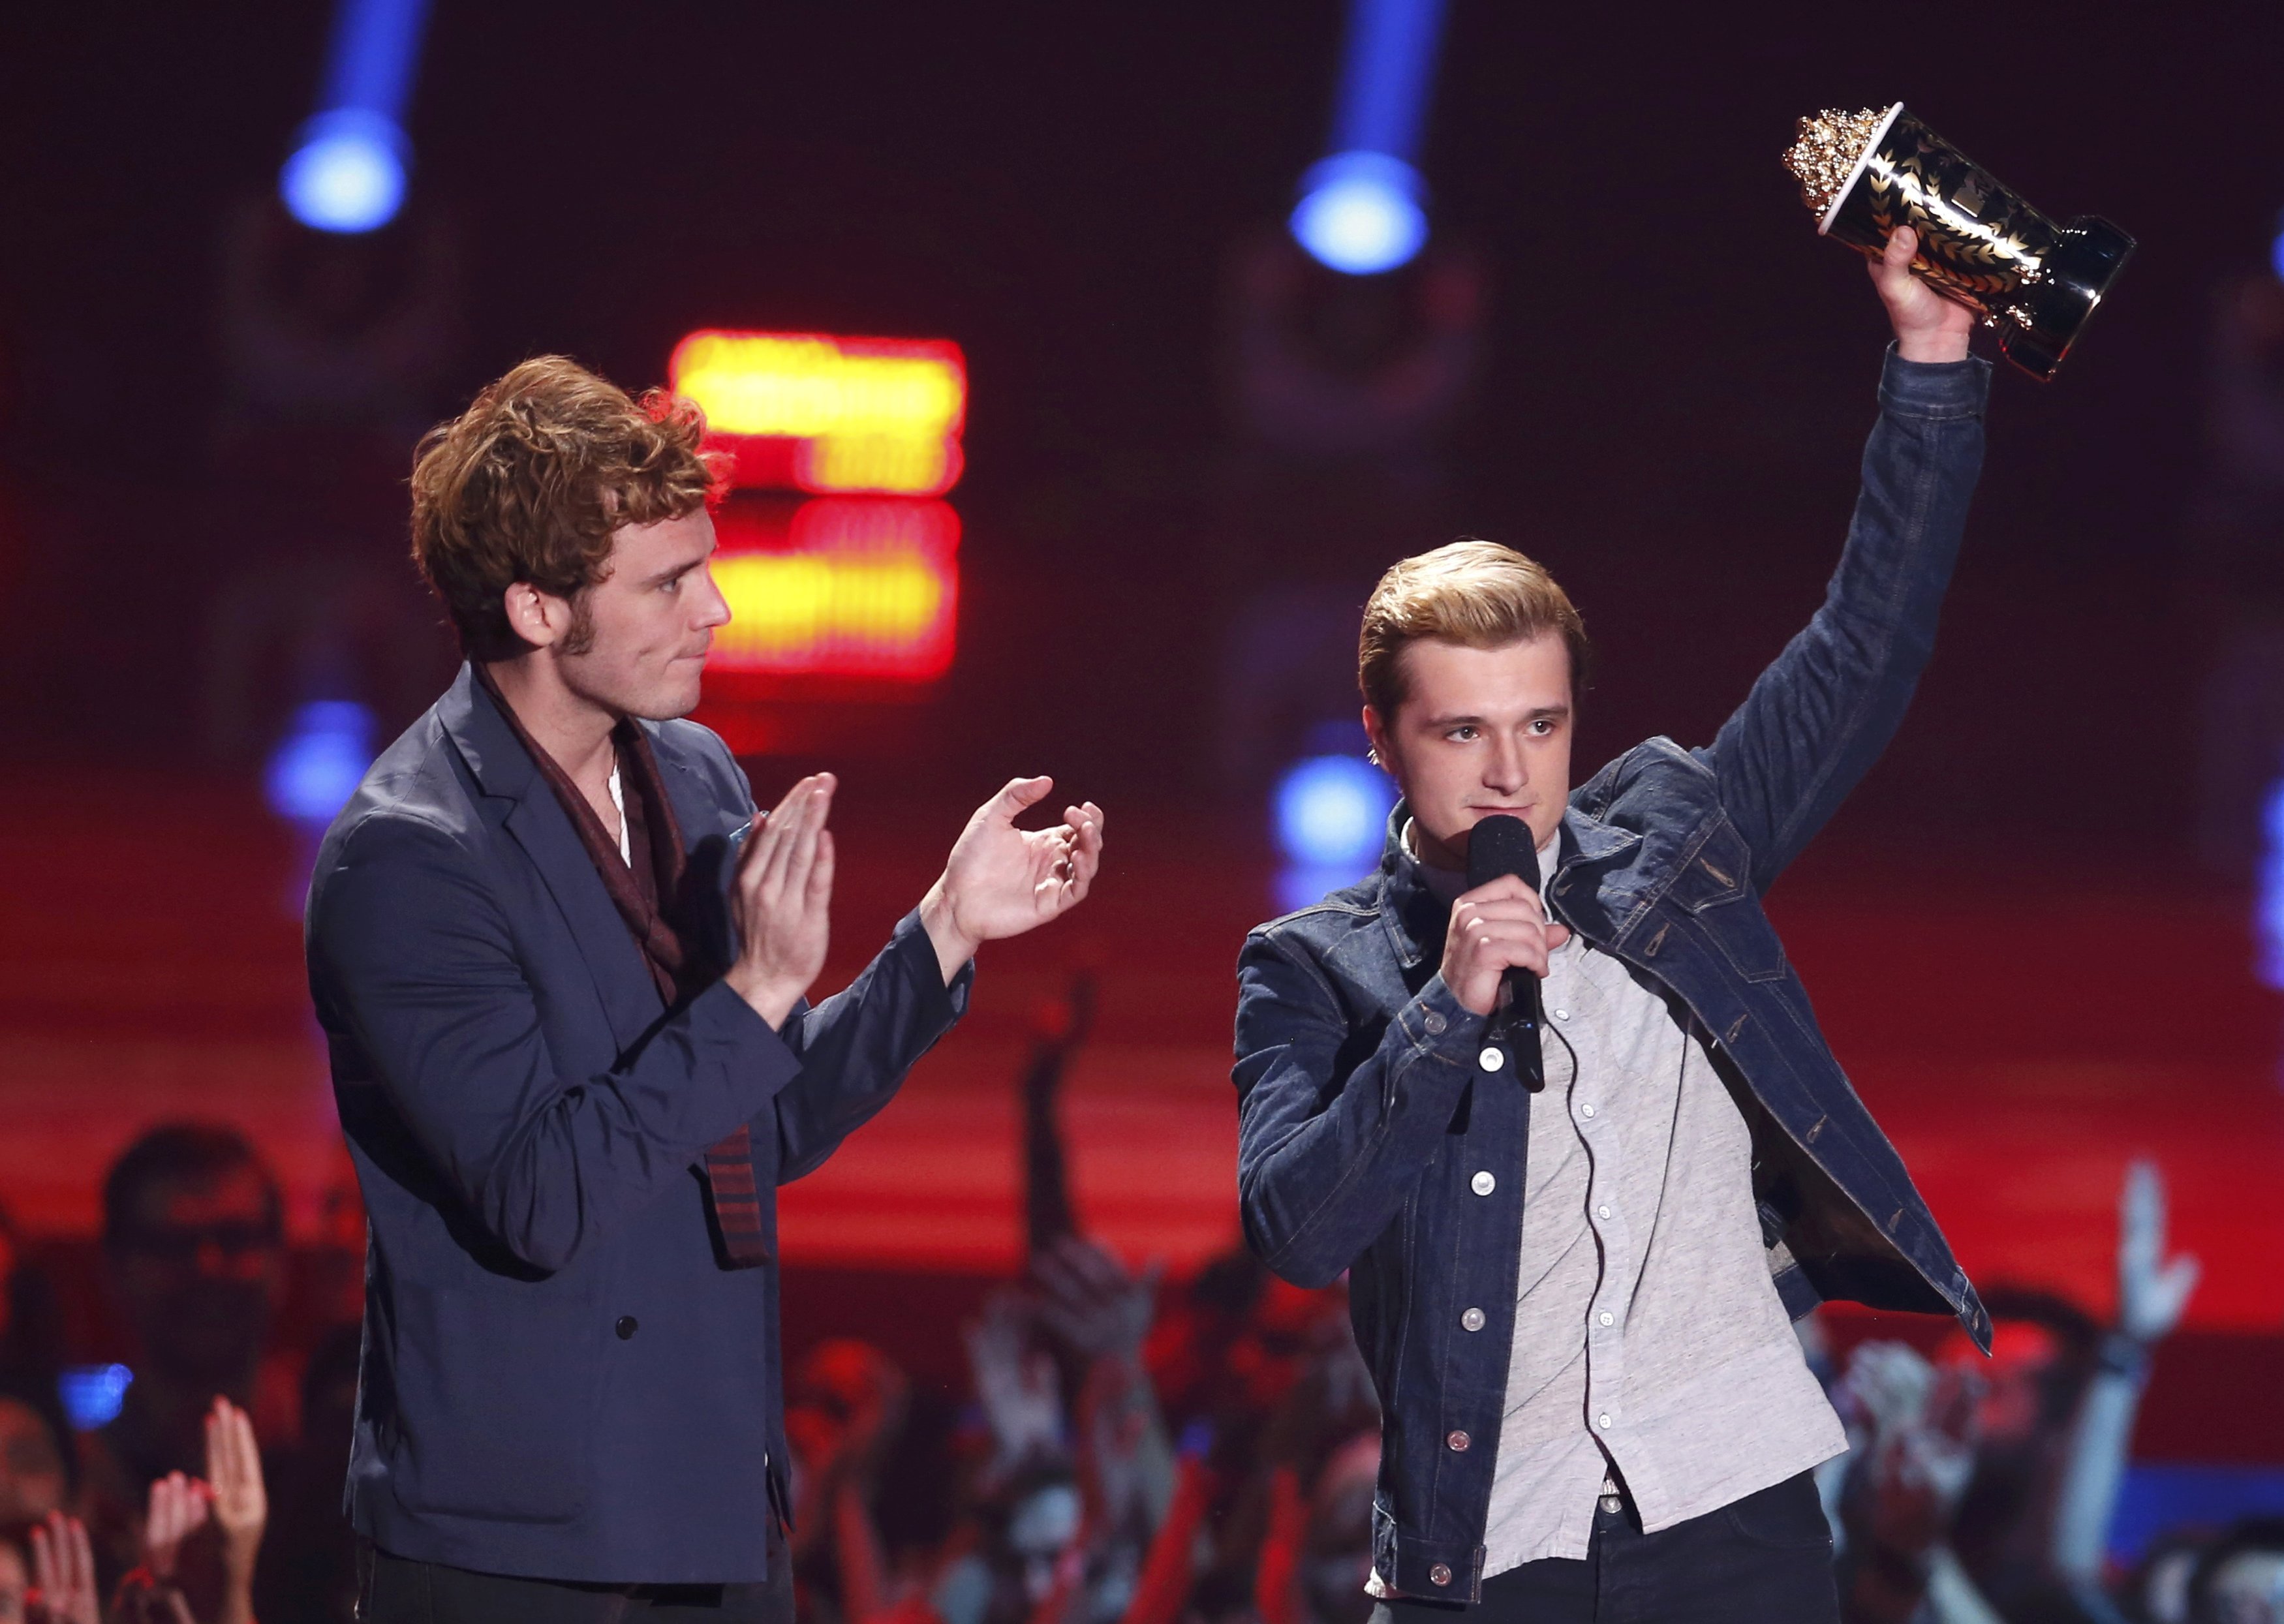 From left: Sam Claflin and Josh Hutcherson accept the award for Best Movie of the Year for "The Hunger Games: Catching Fire" at the 2014 MTV Movie Awards in Los Angeles, on April 13, 2014. (Lucy Nicholson—Reuters)